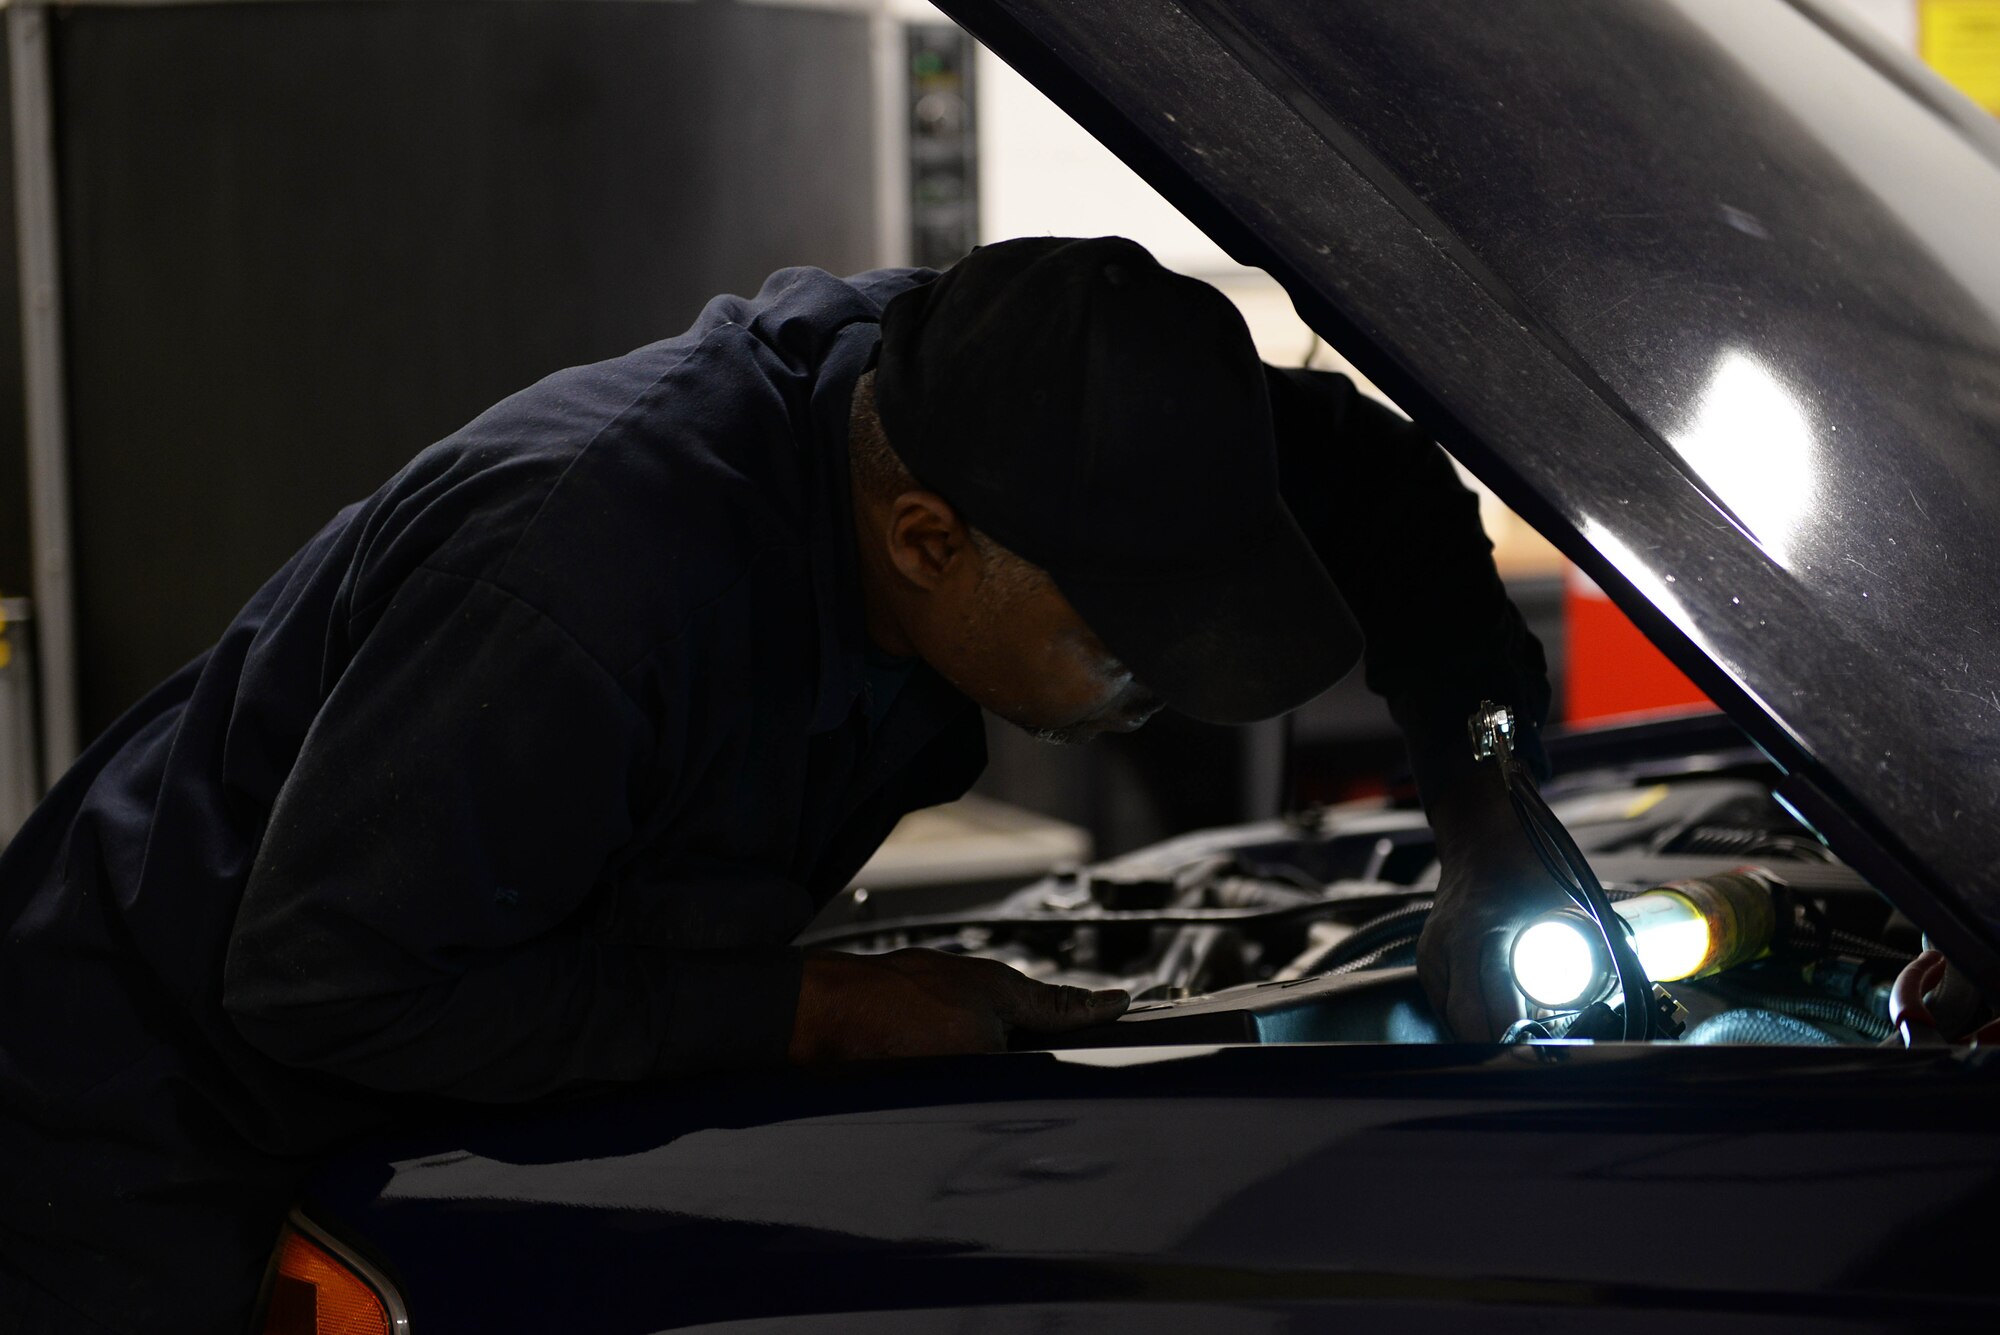 Dewayne Chandler, 14th Logistics Readiness Squadron Transportation Flight heavy equipment mechanic, works on a government vehicle March 20, 2019, on Columbus Air Force Base, Mississippi. The Transportation Flight ensures government vehicles are well-maintained and ready for use. (U.S. Air Force photo by Airman Hannah Bean)